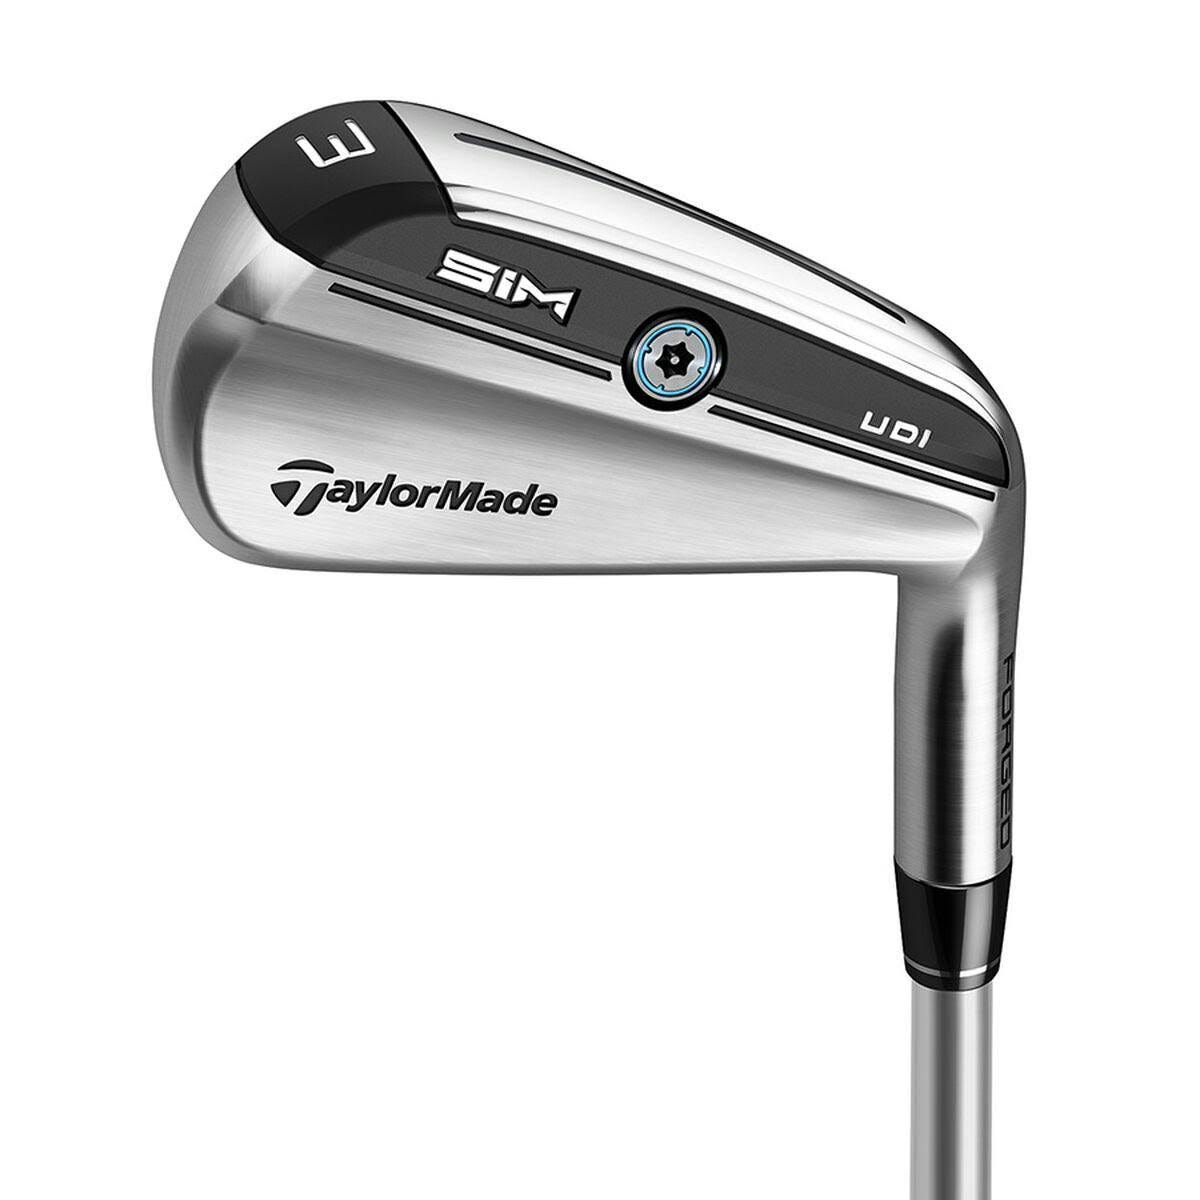 TaylorMade SIM UDI Driving Iron: SpeedFoam, Hollow Body Construction, and Thru Slot Speed Pocket for Maximum Performance | Image